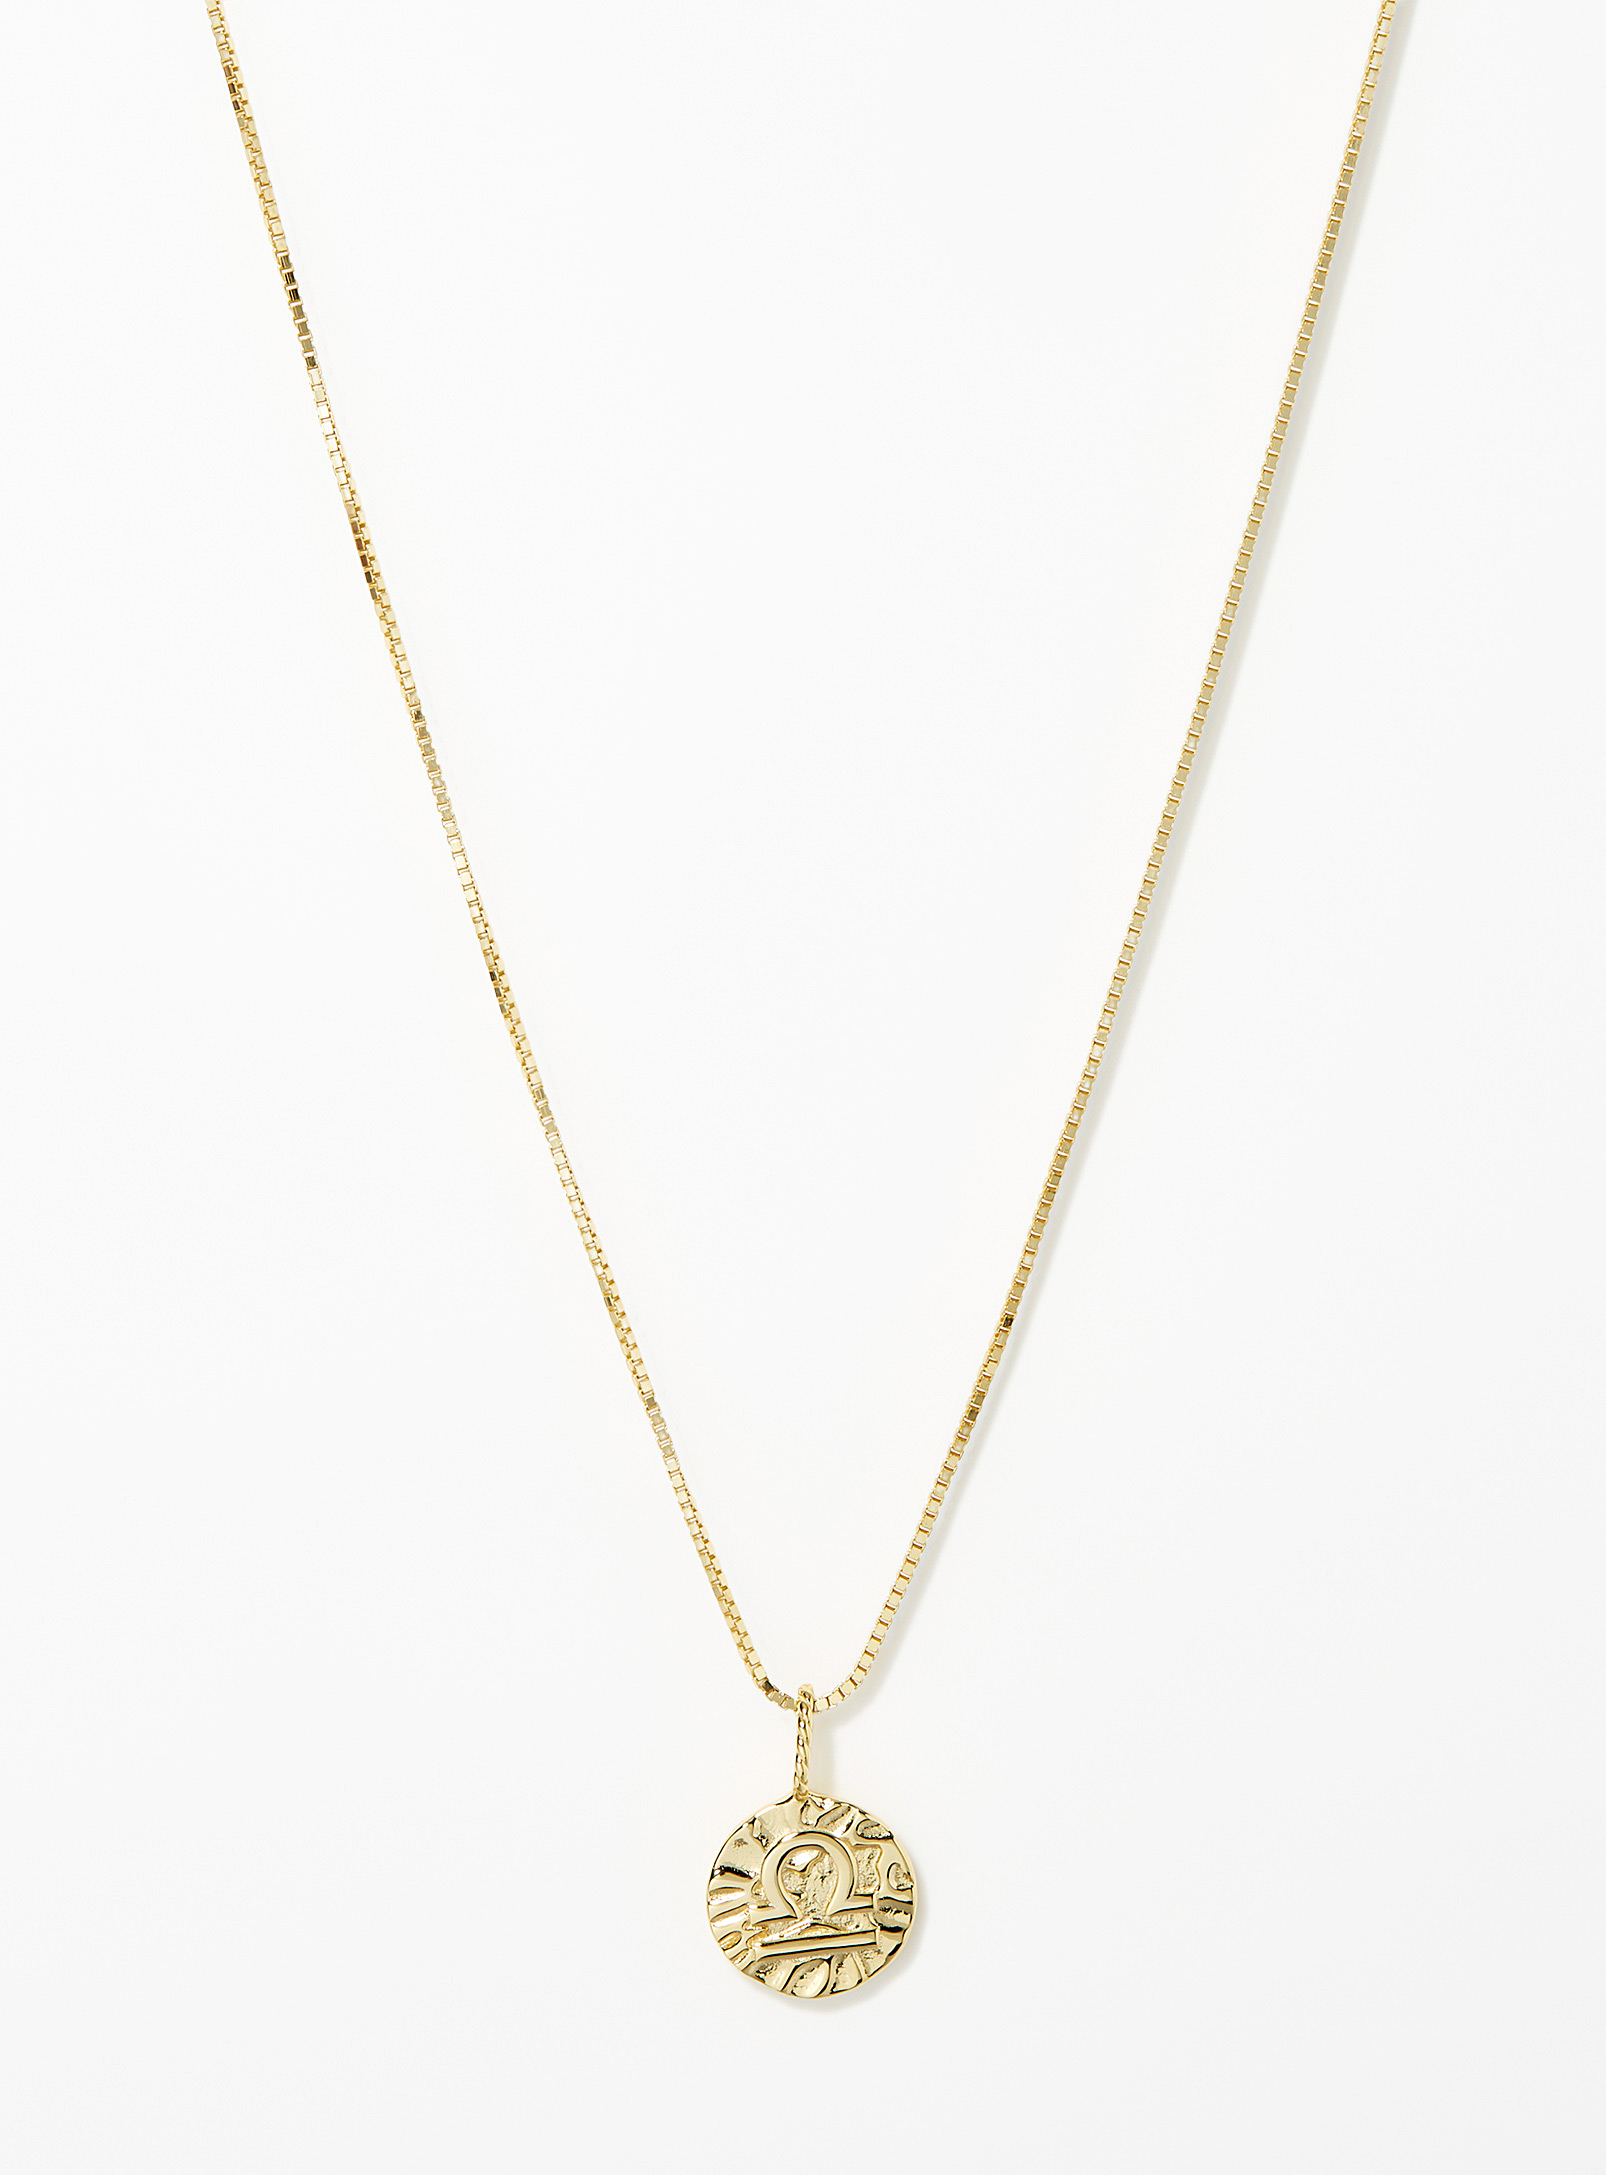 Midi34 X Simons Shimmery Astro Necklace In White